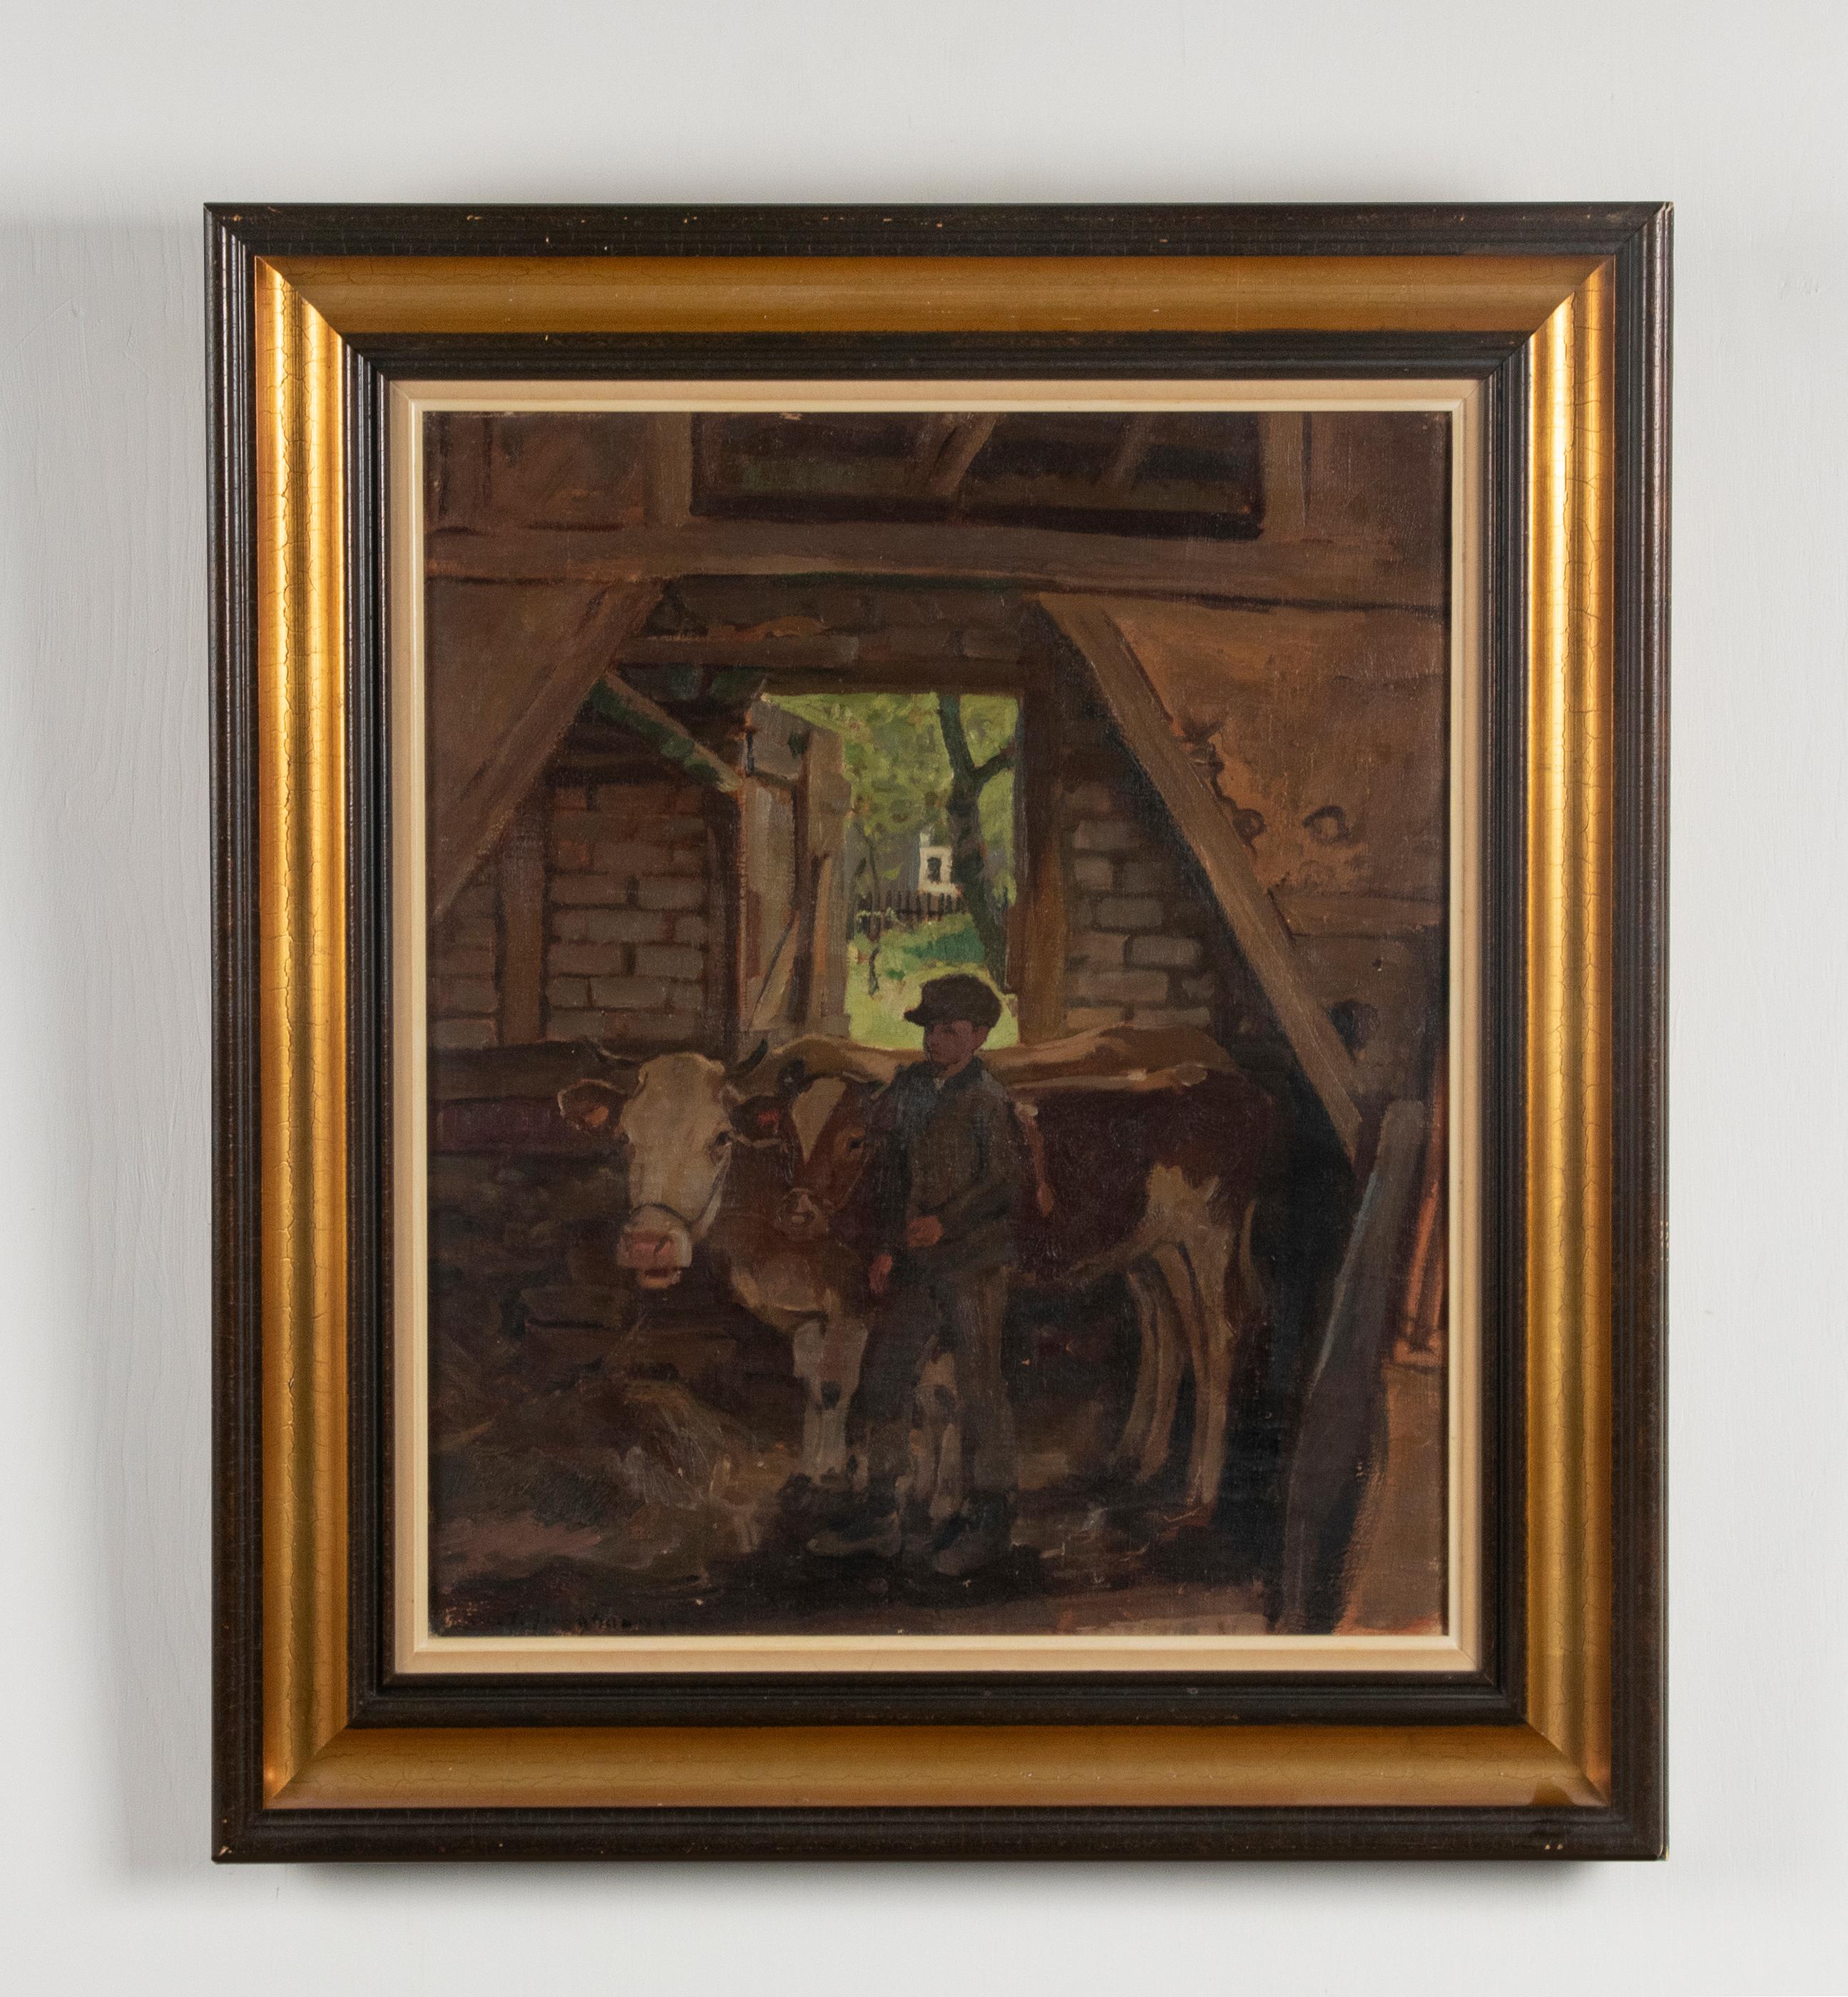 A rural painting with a boy in there stable wit a cow and calf. Signed left under Julius Paul Junghanns. Austria, 1876-1958. Oil on canvas. With a wooden gilded frame. The frame is not original, it's from the early 1960s. Striking and fine painted.